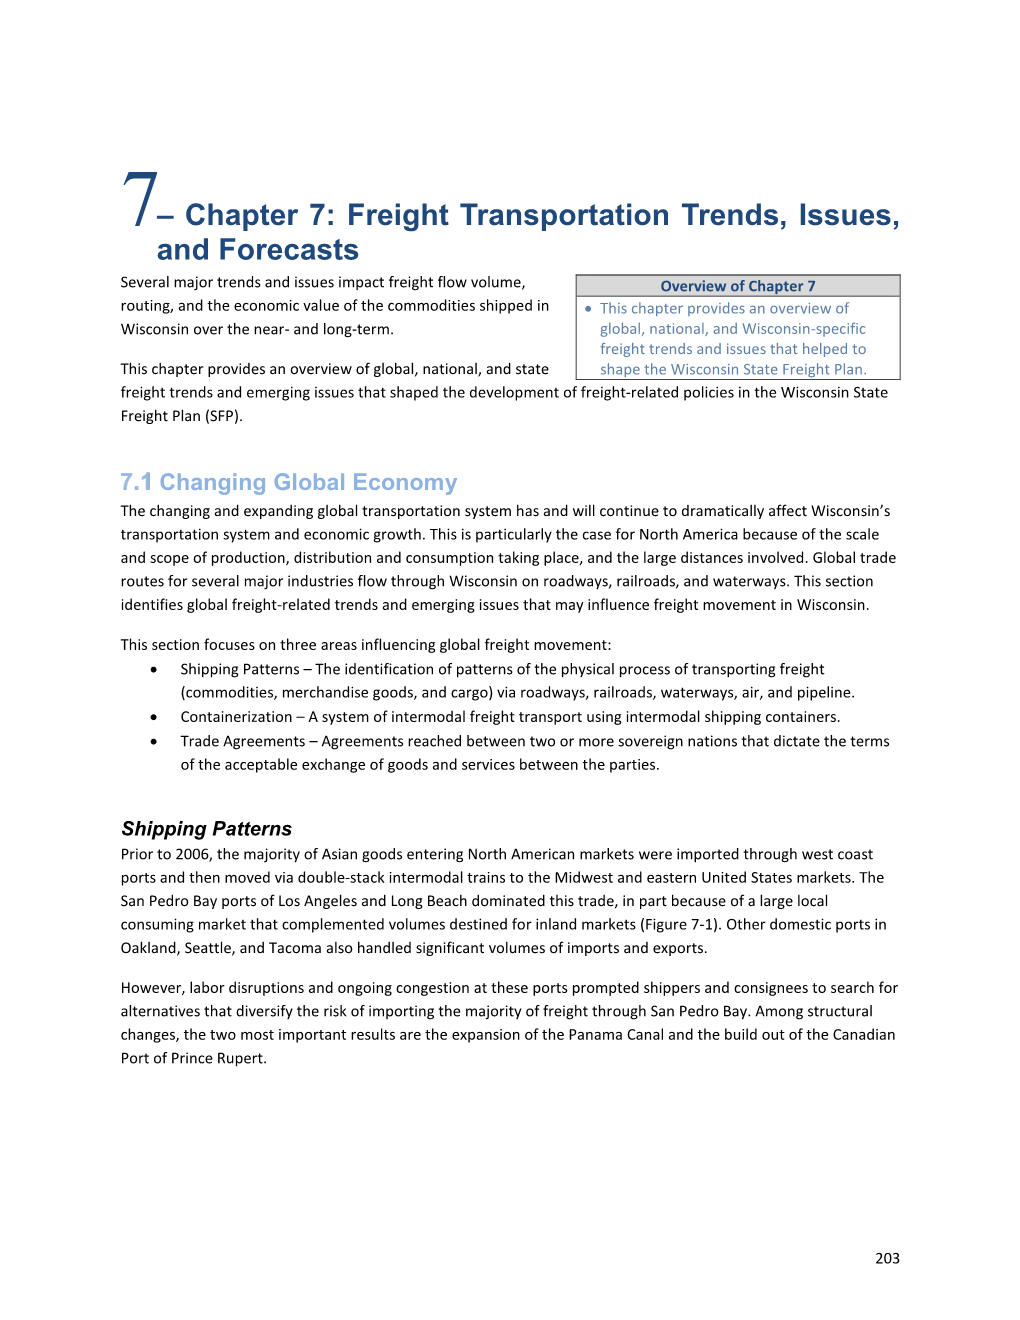 Chapter 7 – Freight Transportation Trends, Issues, and Forecasts